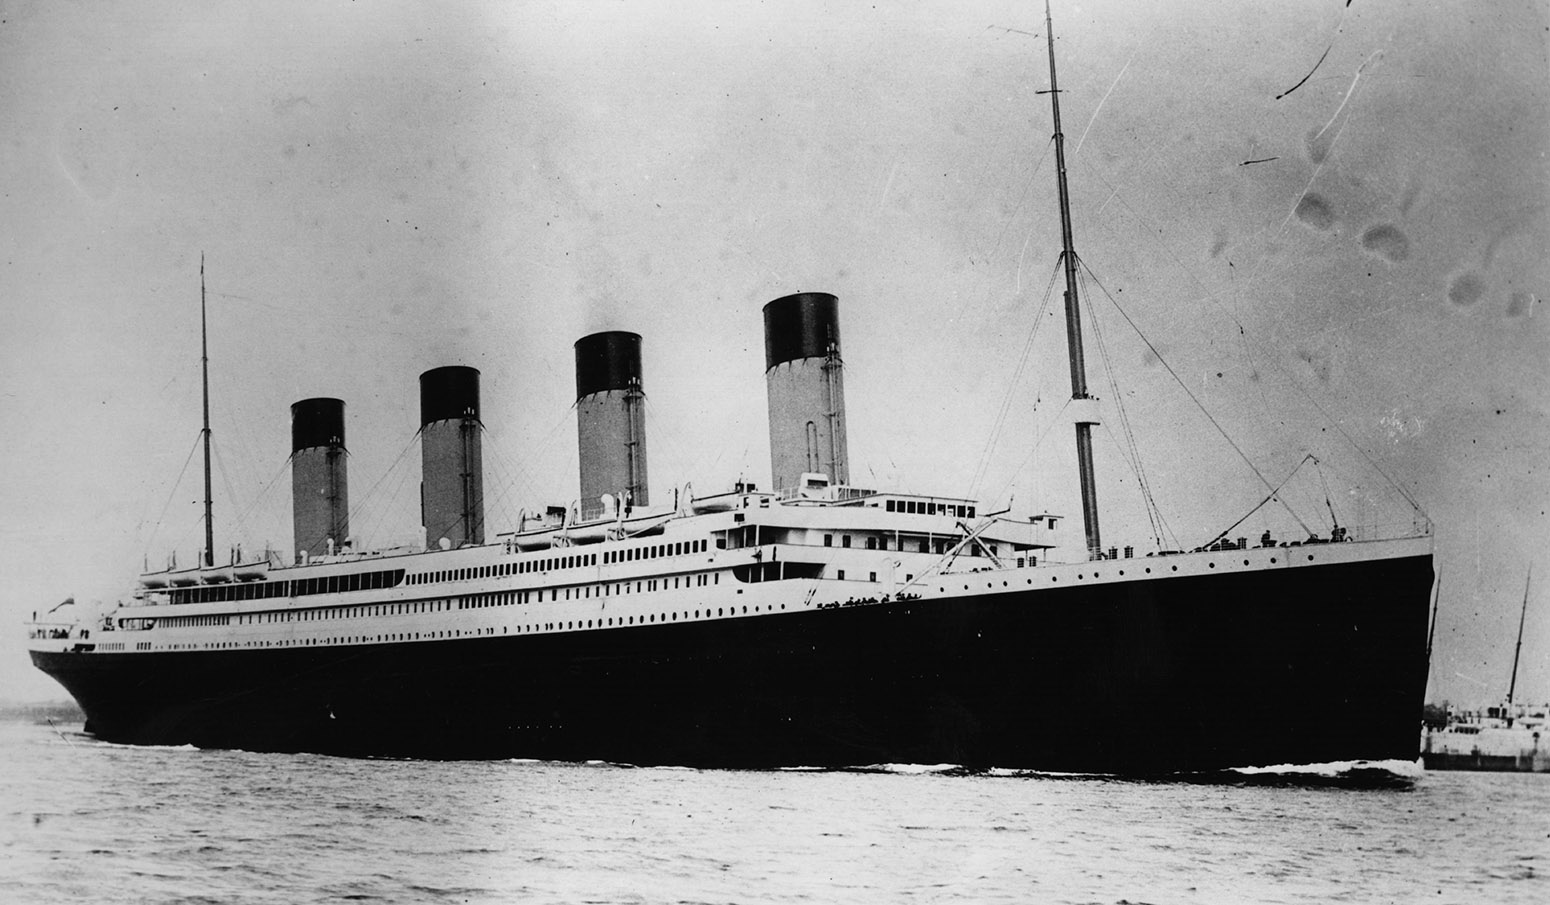 On This Day In 1912 The Titanic Hit An Iceberg In The Freezing Atlantic Ocean The Irish Post